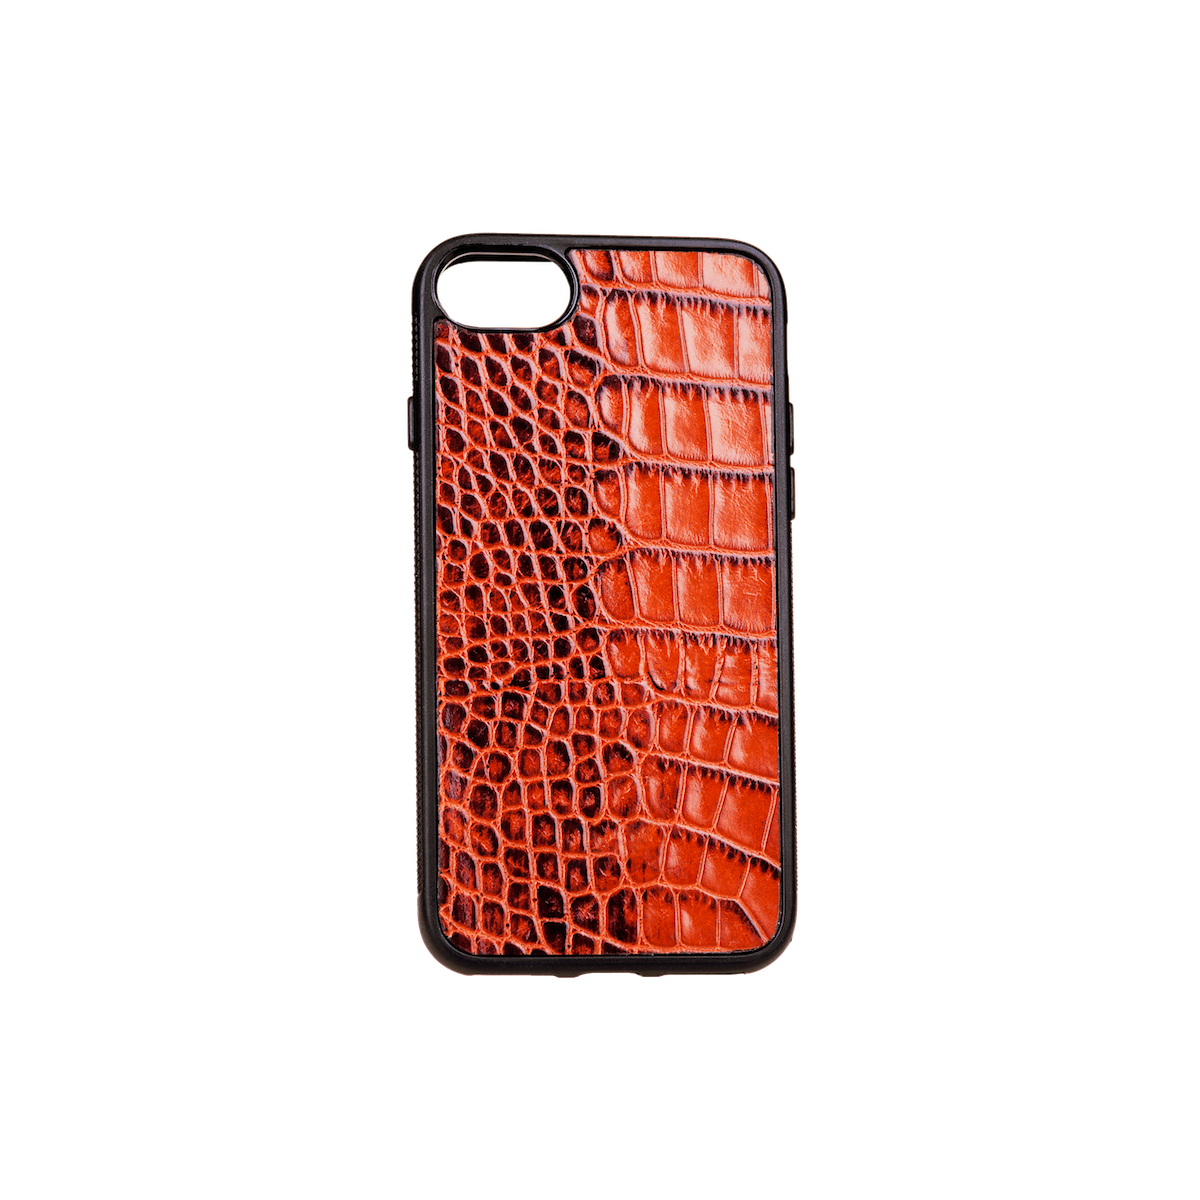 Iphone 7/8 Case, Tan Croco Leather, MAISON JMK-VONMEL Luxe Gifts